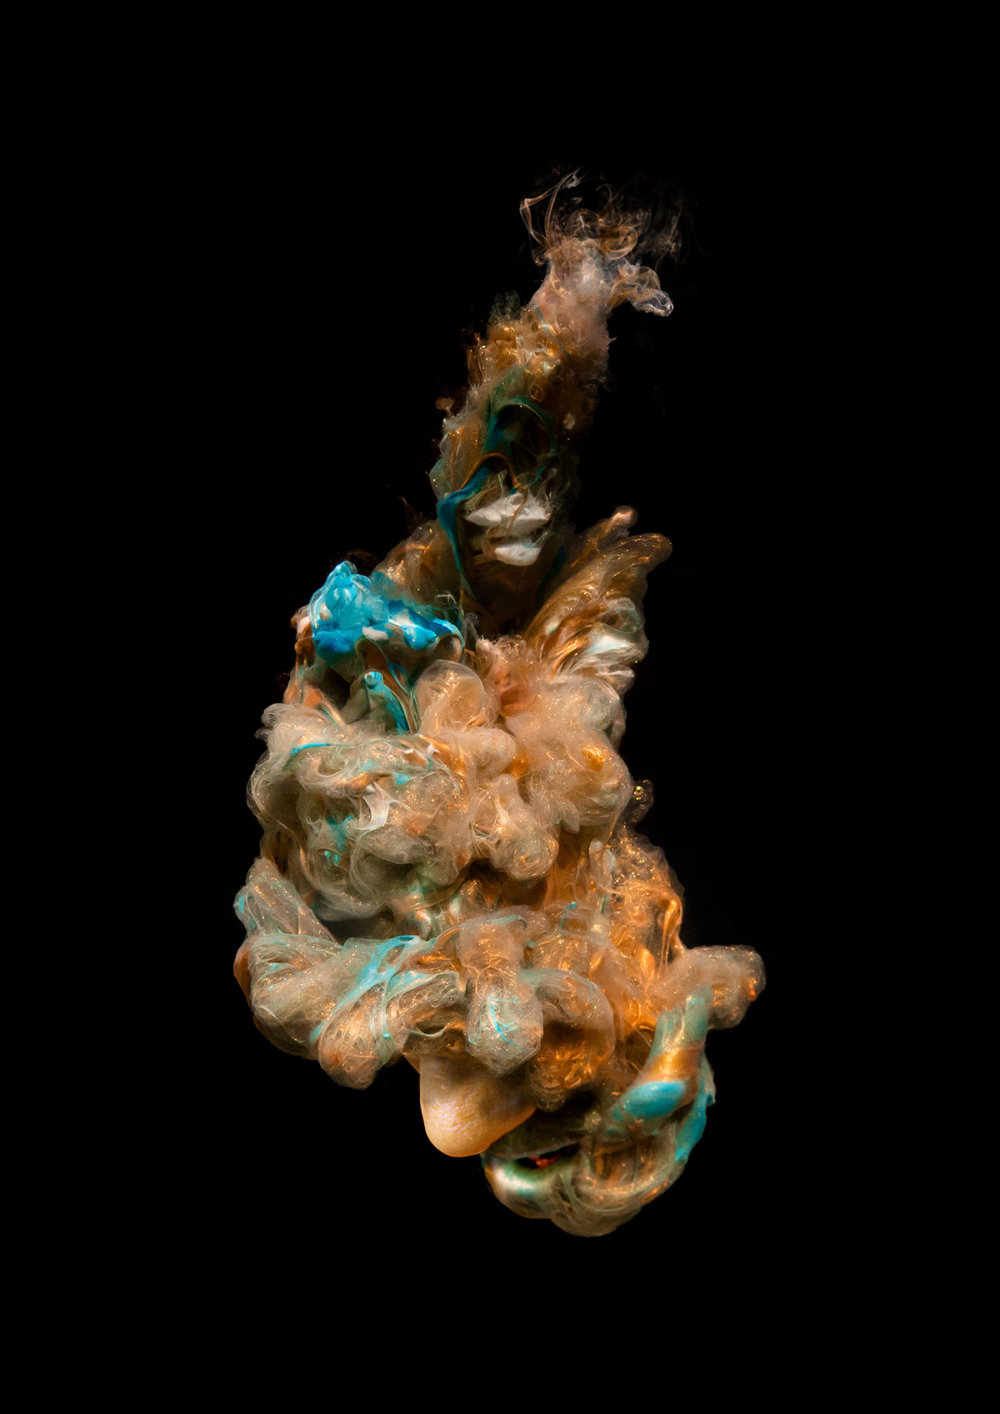 Renatus Human Faces Blended With Colorful Paint Splashes By Chris Slabber 2